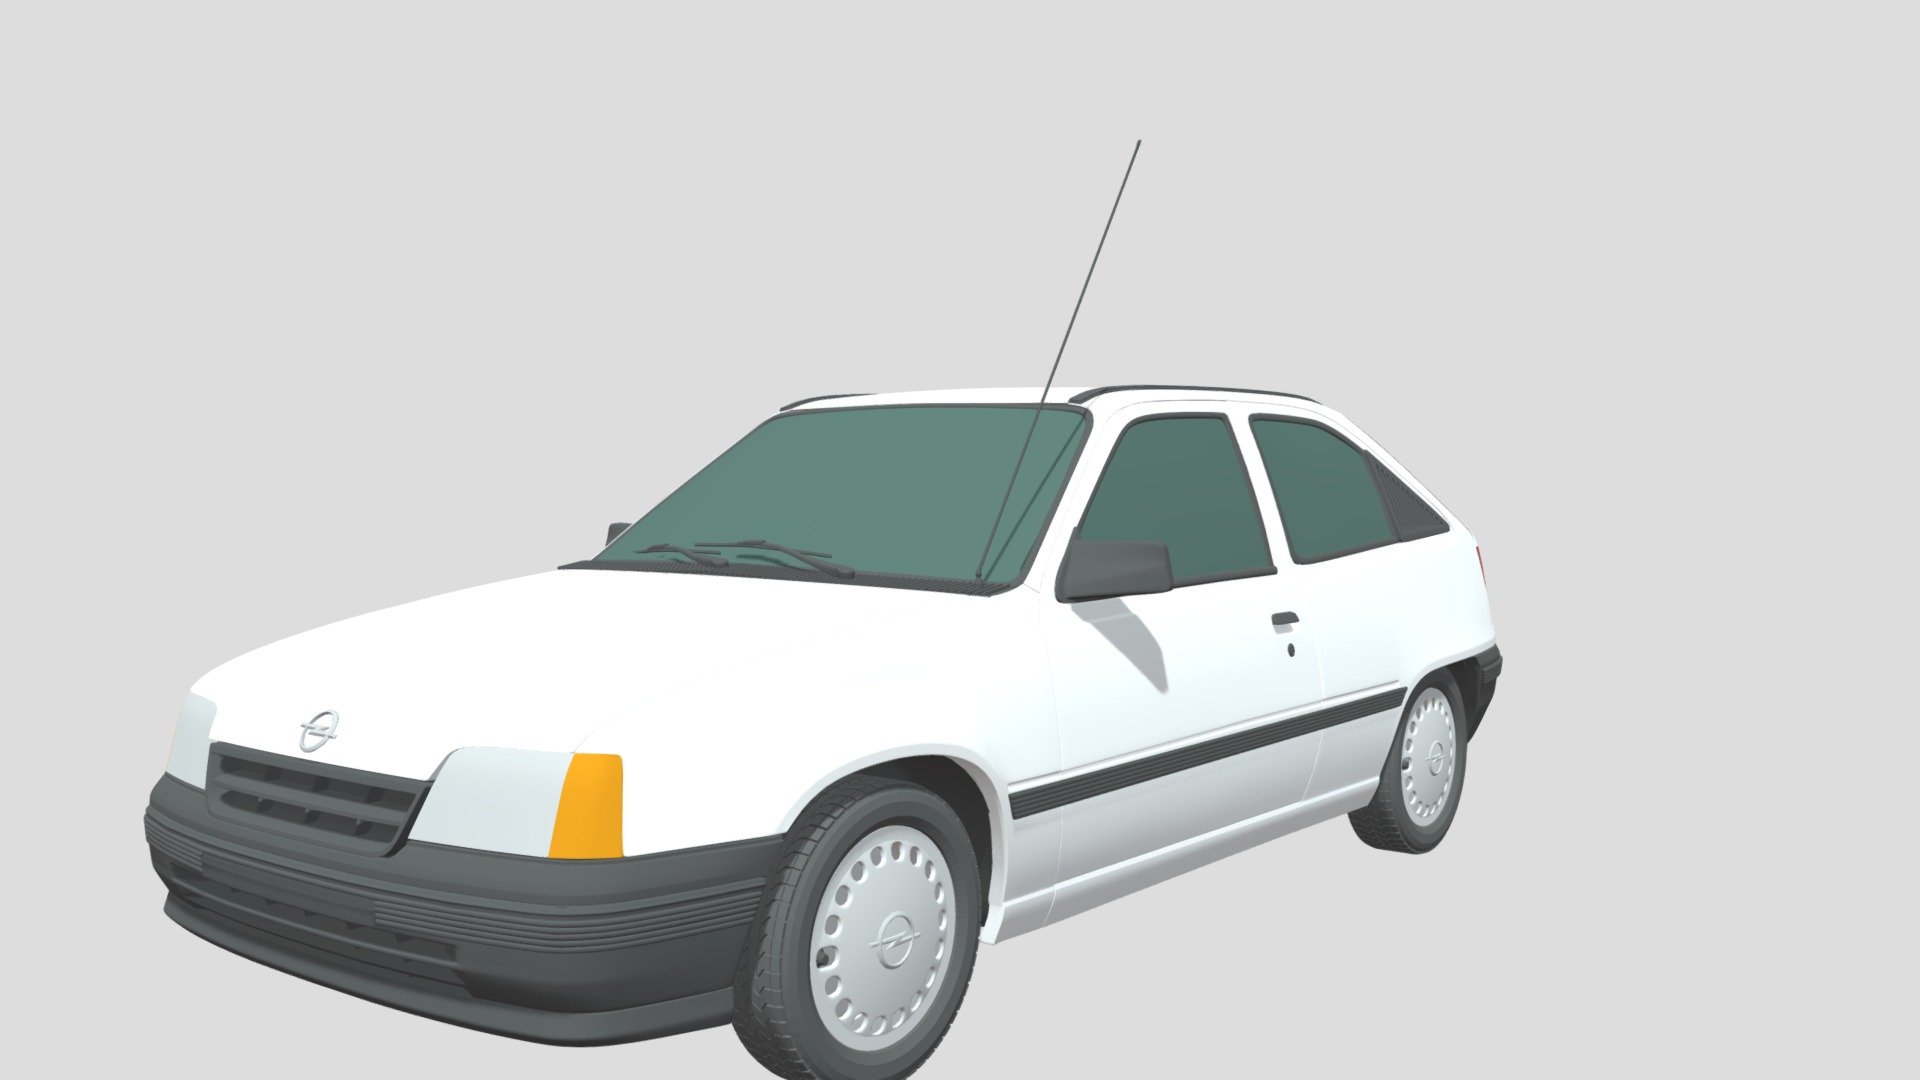 Introducing our stunning photorealistic 3D model of the Opel Kadett E Hatchback (3-Doors) (1991) car, a true masterpiece of digital craftsmanship that will elevate your projects to the next level. This meticulously crafted model captures every curve, detail, and essence of a real Opel Kadett E Hatchback (3-Doors) (1991) car, providing you with unparalleled realism and versatility for your creative endeavors.

Our photorealistic 3D model of the Opel Kadett E Hatchback (3-Doors) (1991) car is a testament to precision and attention to detail. Each contour, from the sleek body lines to the intricacies of the headlights and tail lights, has been painstakingly recreated to mirror the elegance and realism of a genuine Opel Kadett E Hatchback (3-Doors) (1991) automobile. Whether you're an automotive designer, a video game developer, or a filmmaker, this 3D model will bring your visions to life with exceptional fidelity 3d model